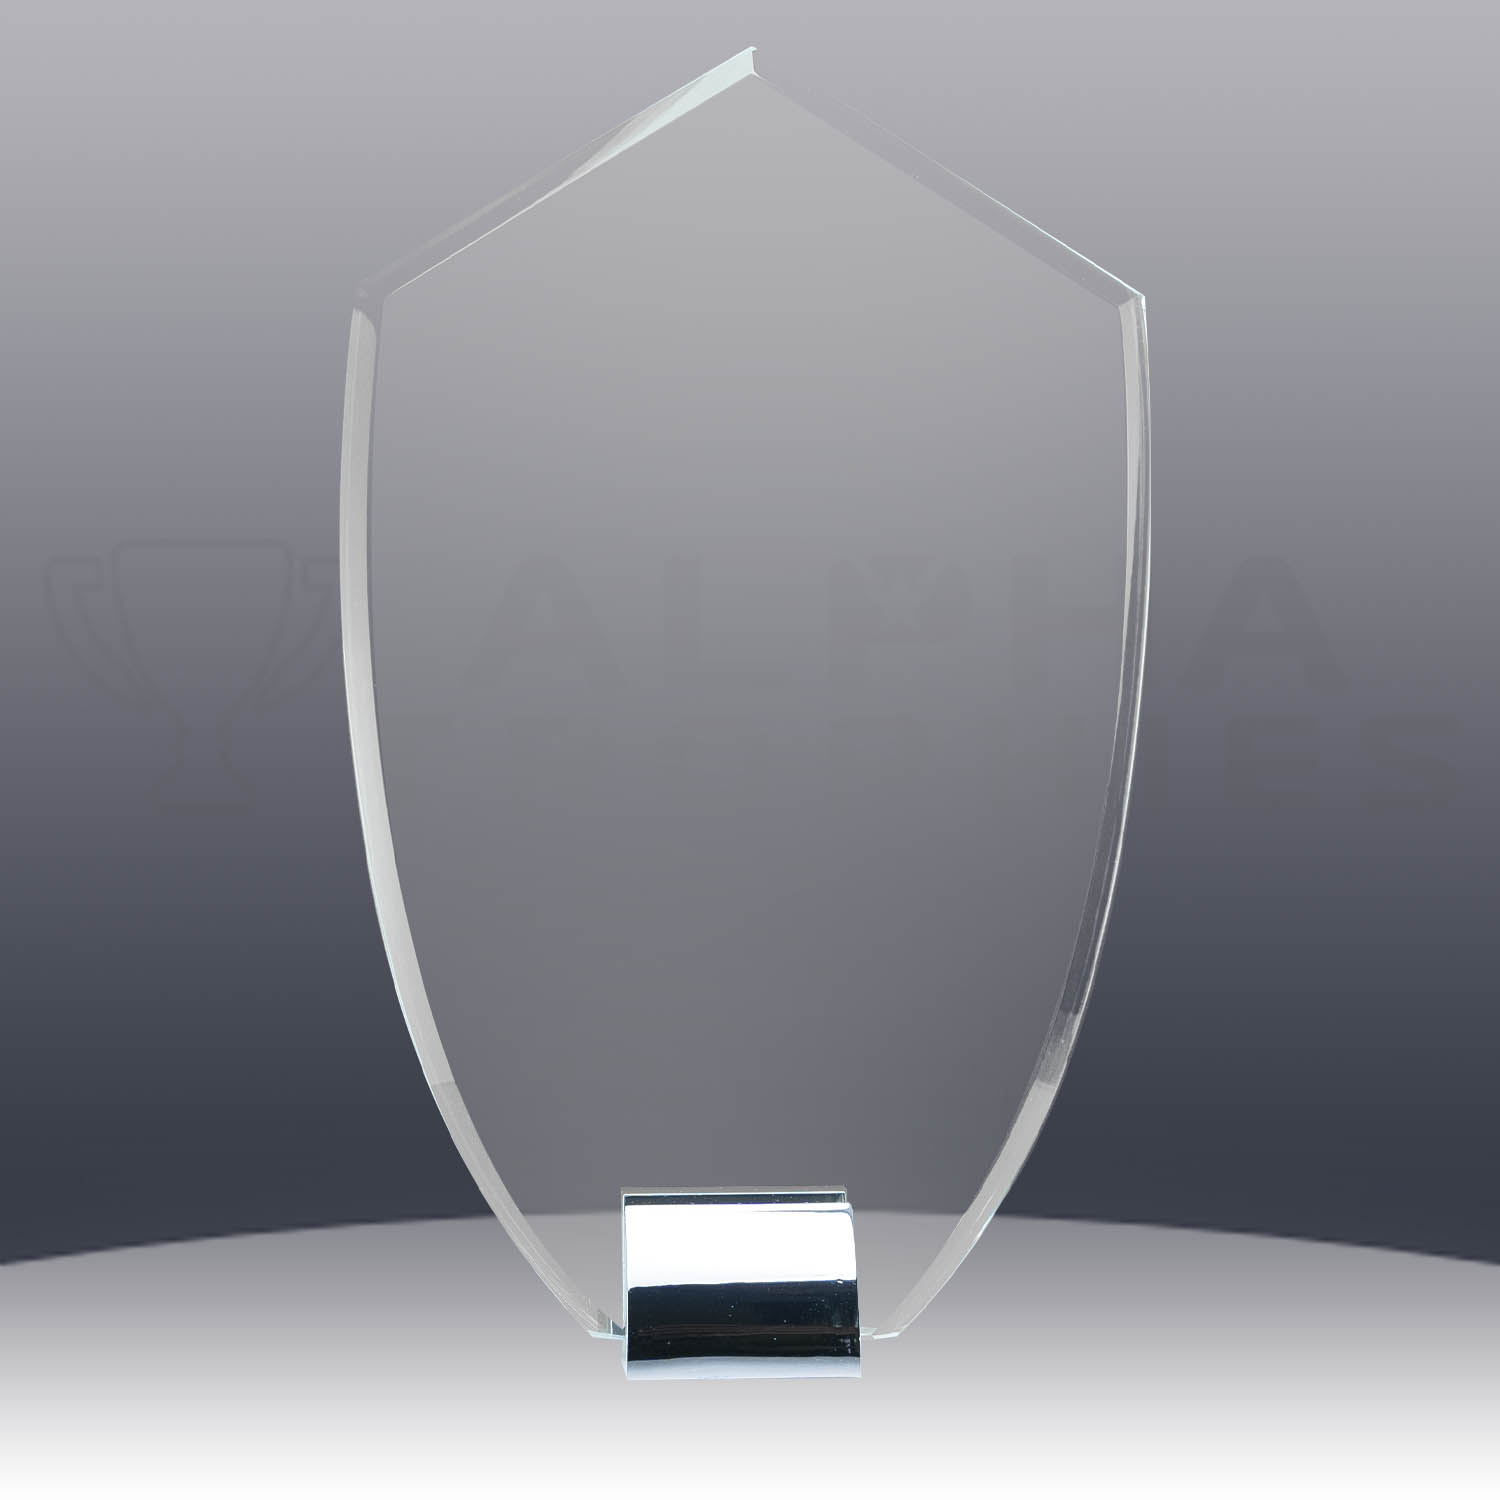 knight-glass-metal-award-gm123a-front